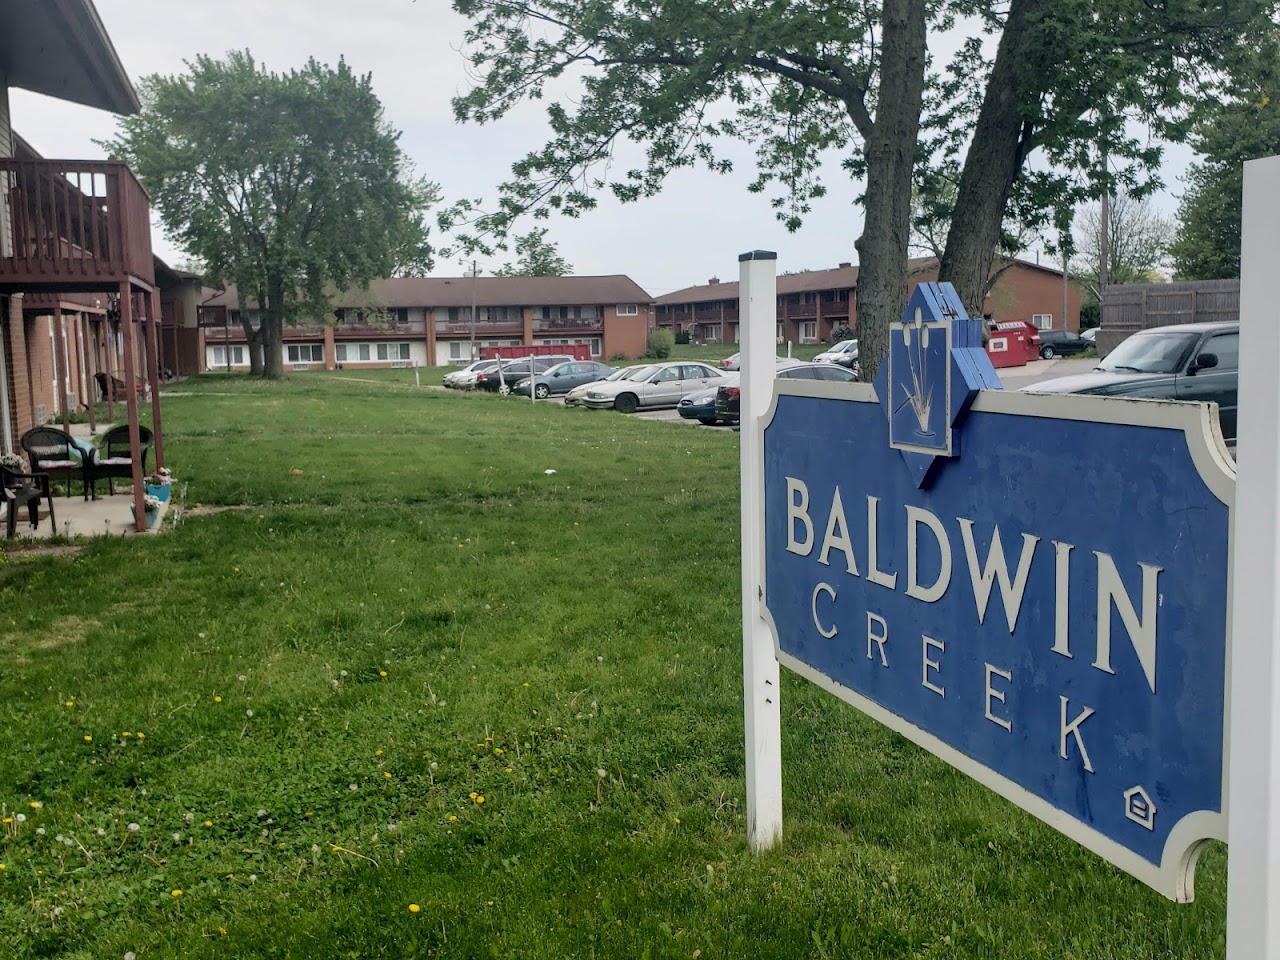 Photo of BALDWIN CREEK. Affordable housing located at 2020 HOBSON RD FORT WAYNE, IN 46805